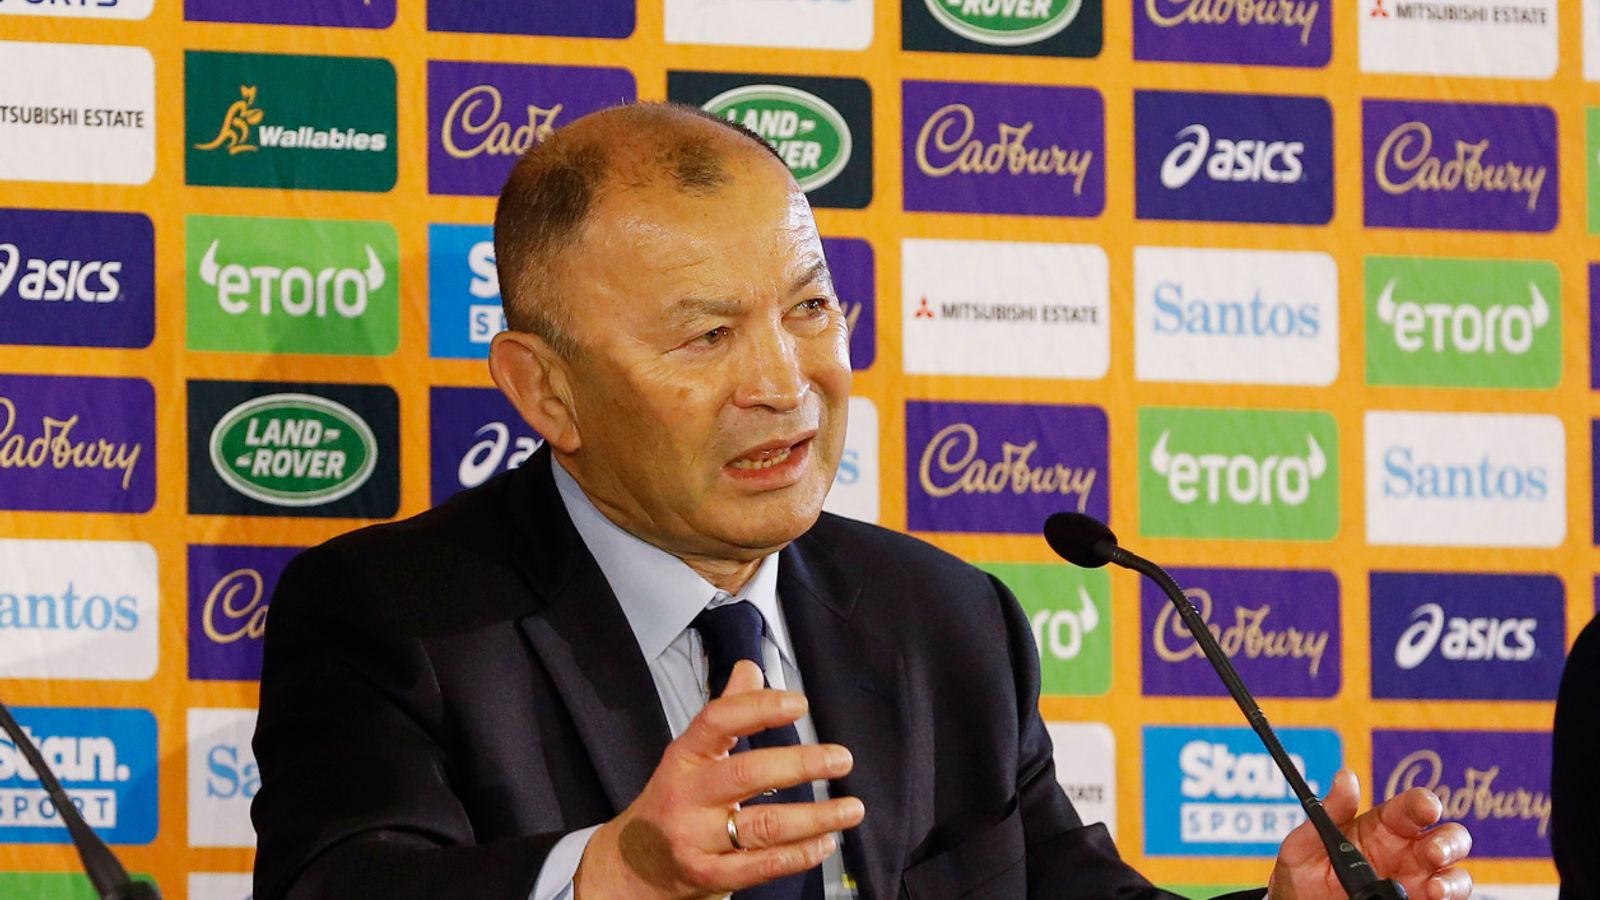 Eddie Jones issues rallying cry to Australia rugby | ‘I am not the messiah’